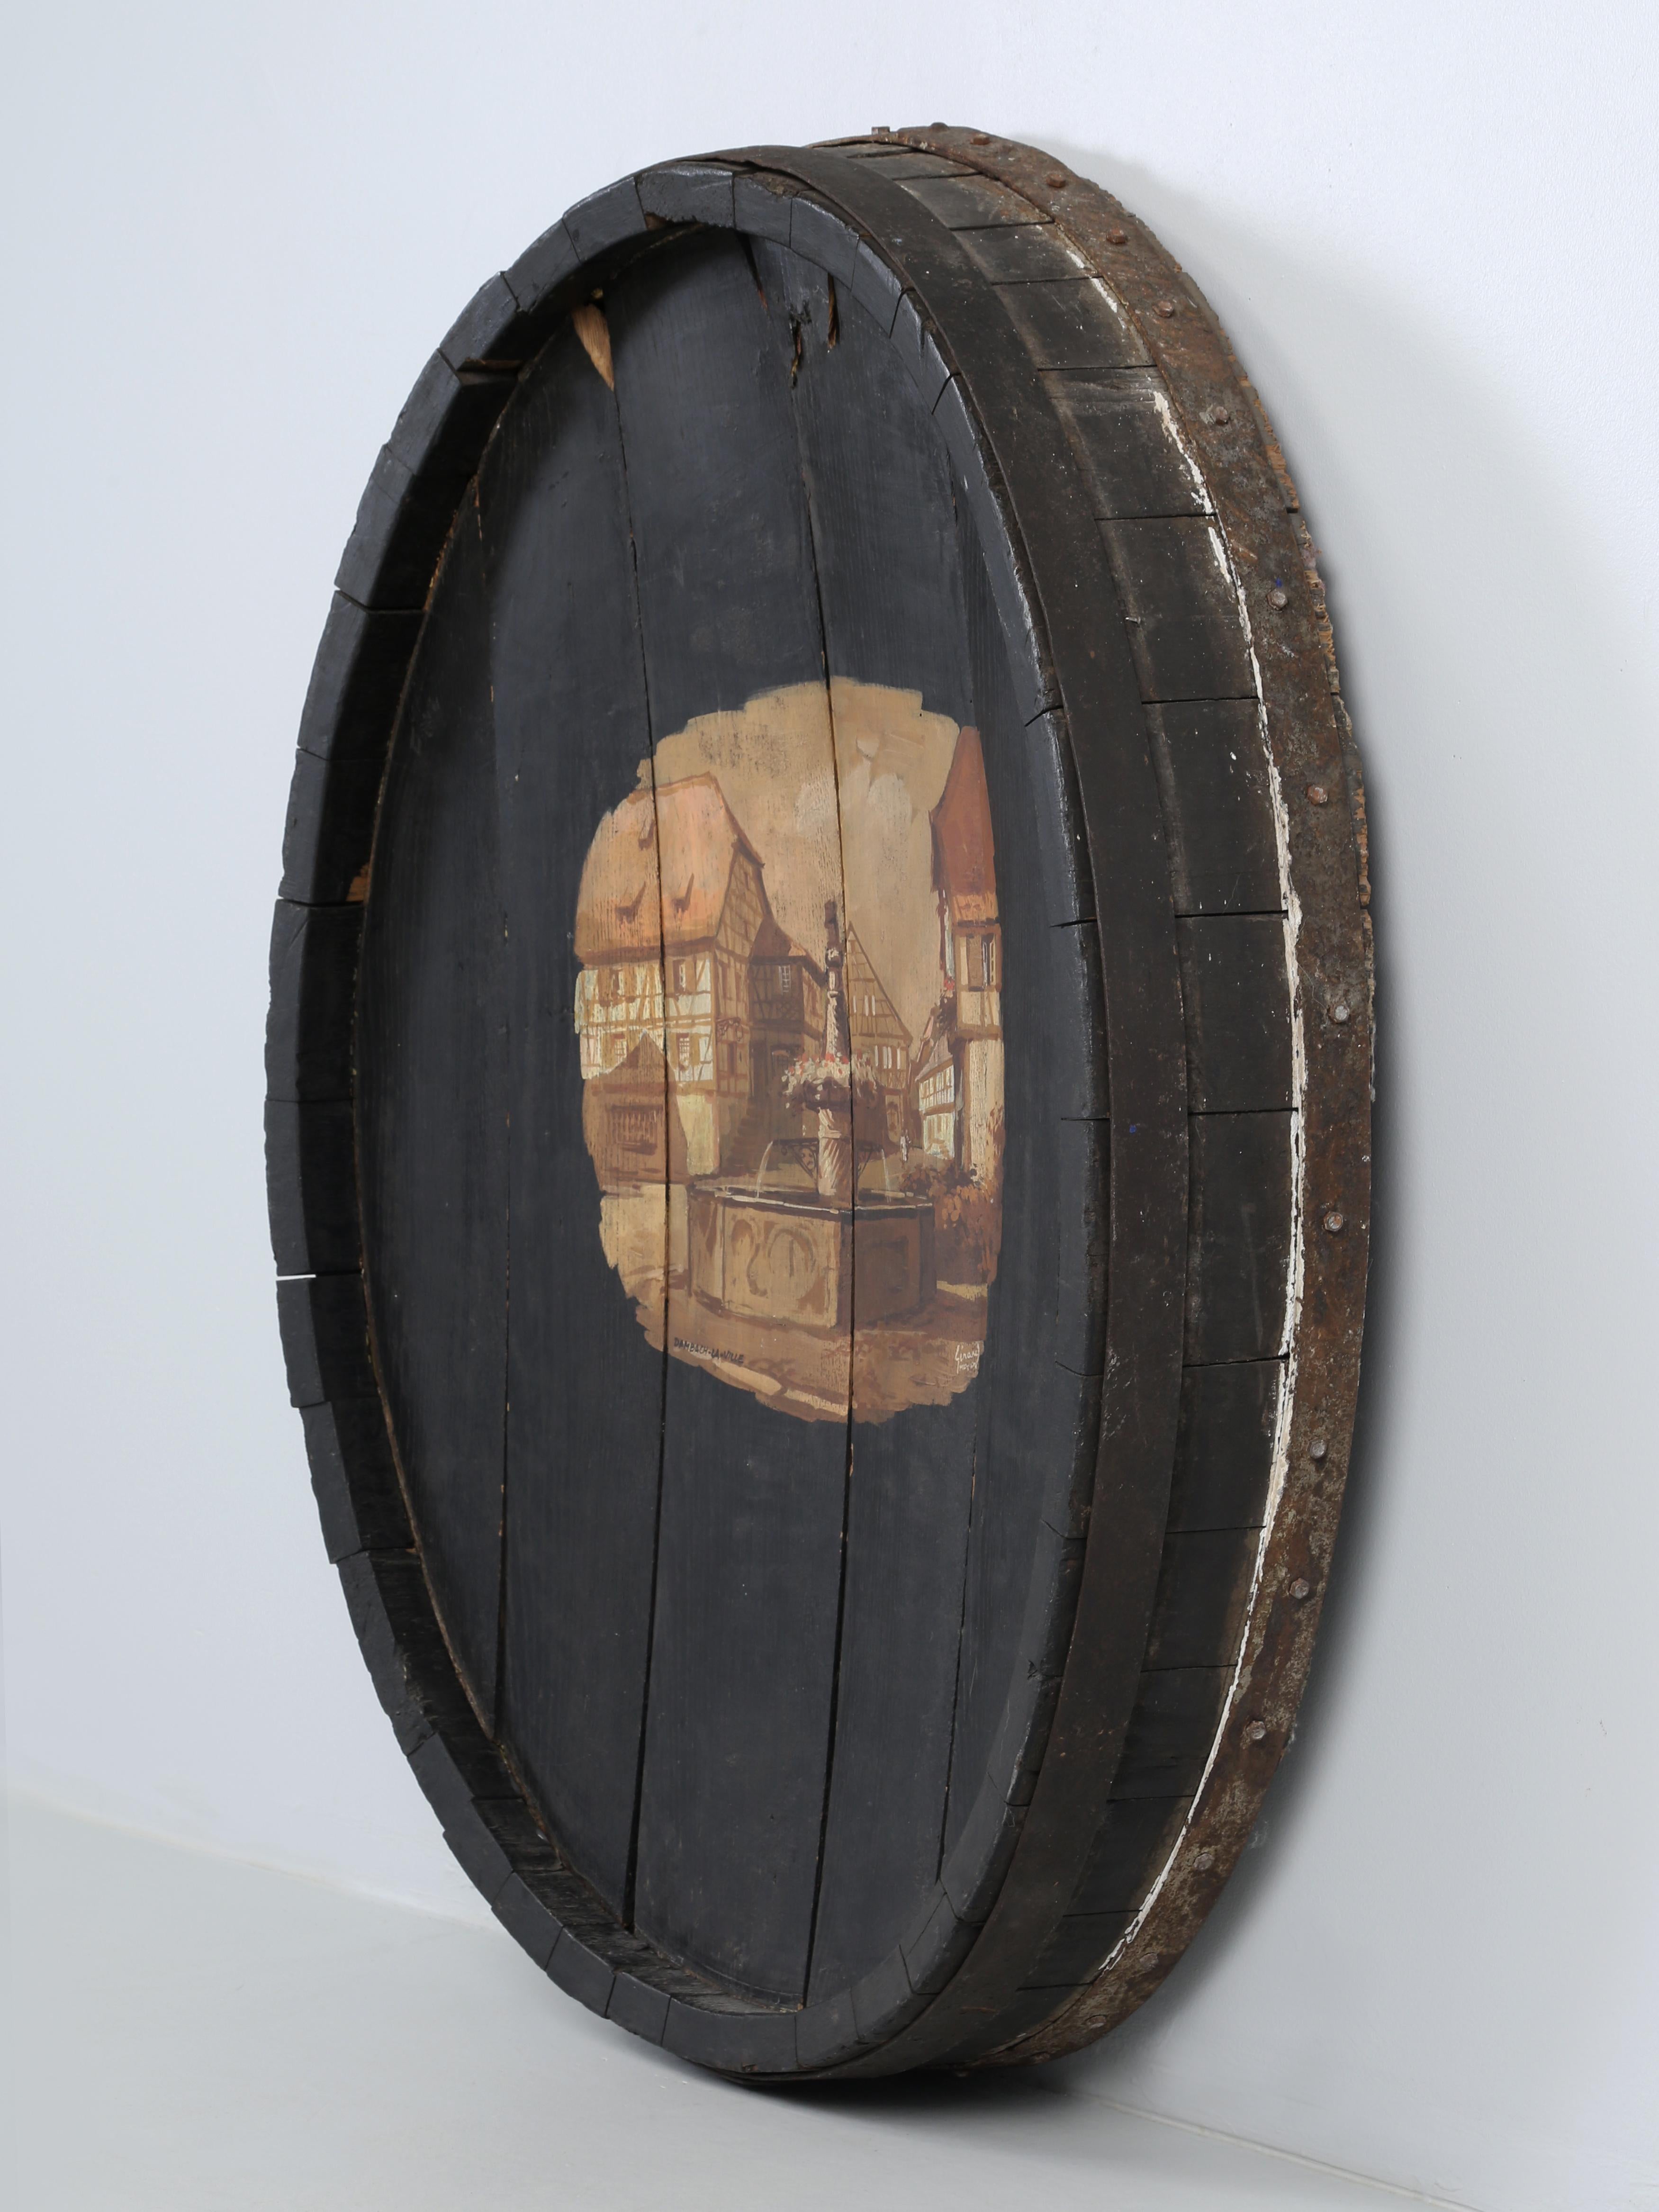 Antique Wine Barrel End Repurposed as Wall Art with a beautifully executed painting of Dambach-la-ville, France. Dambach-la-Ville is a small area in the Alsace Region in North-East France. Dambach-la-Ville is known for its high- quality wines and we